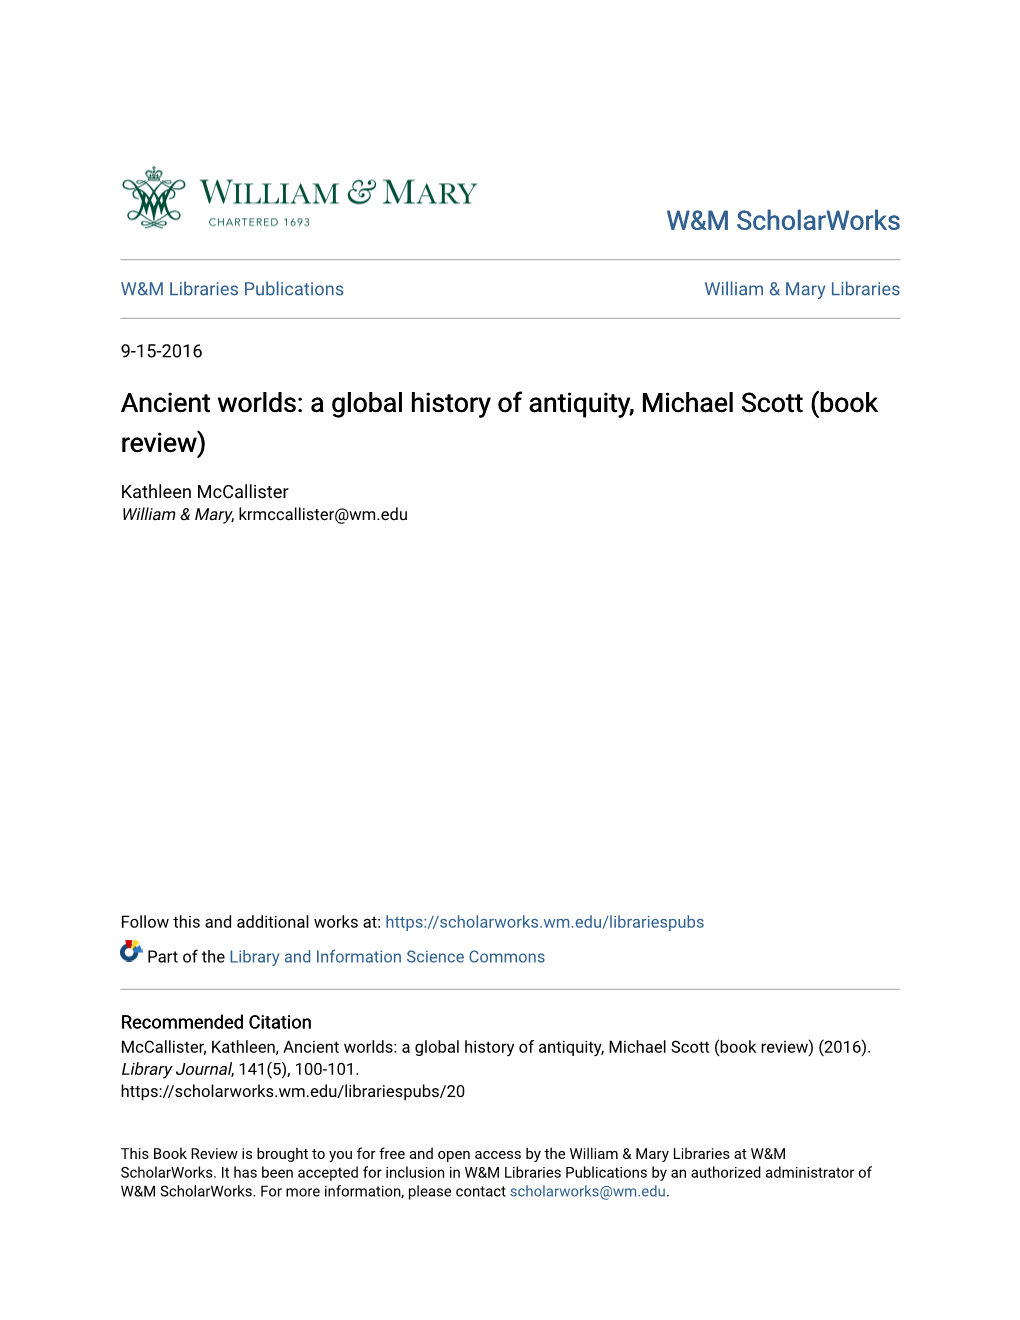 Ancient Worlds: a Global History of Antiquity, Michael Scott (Book Review)